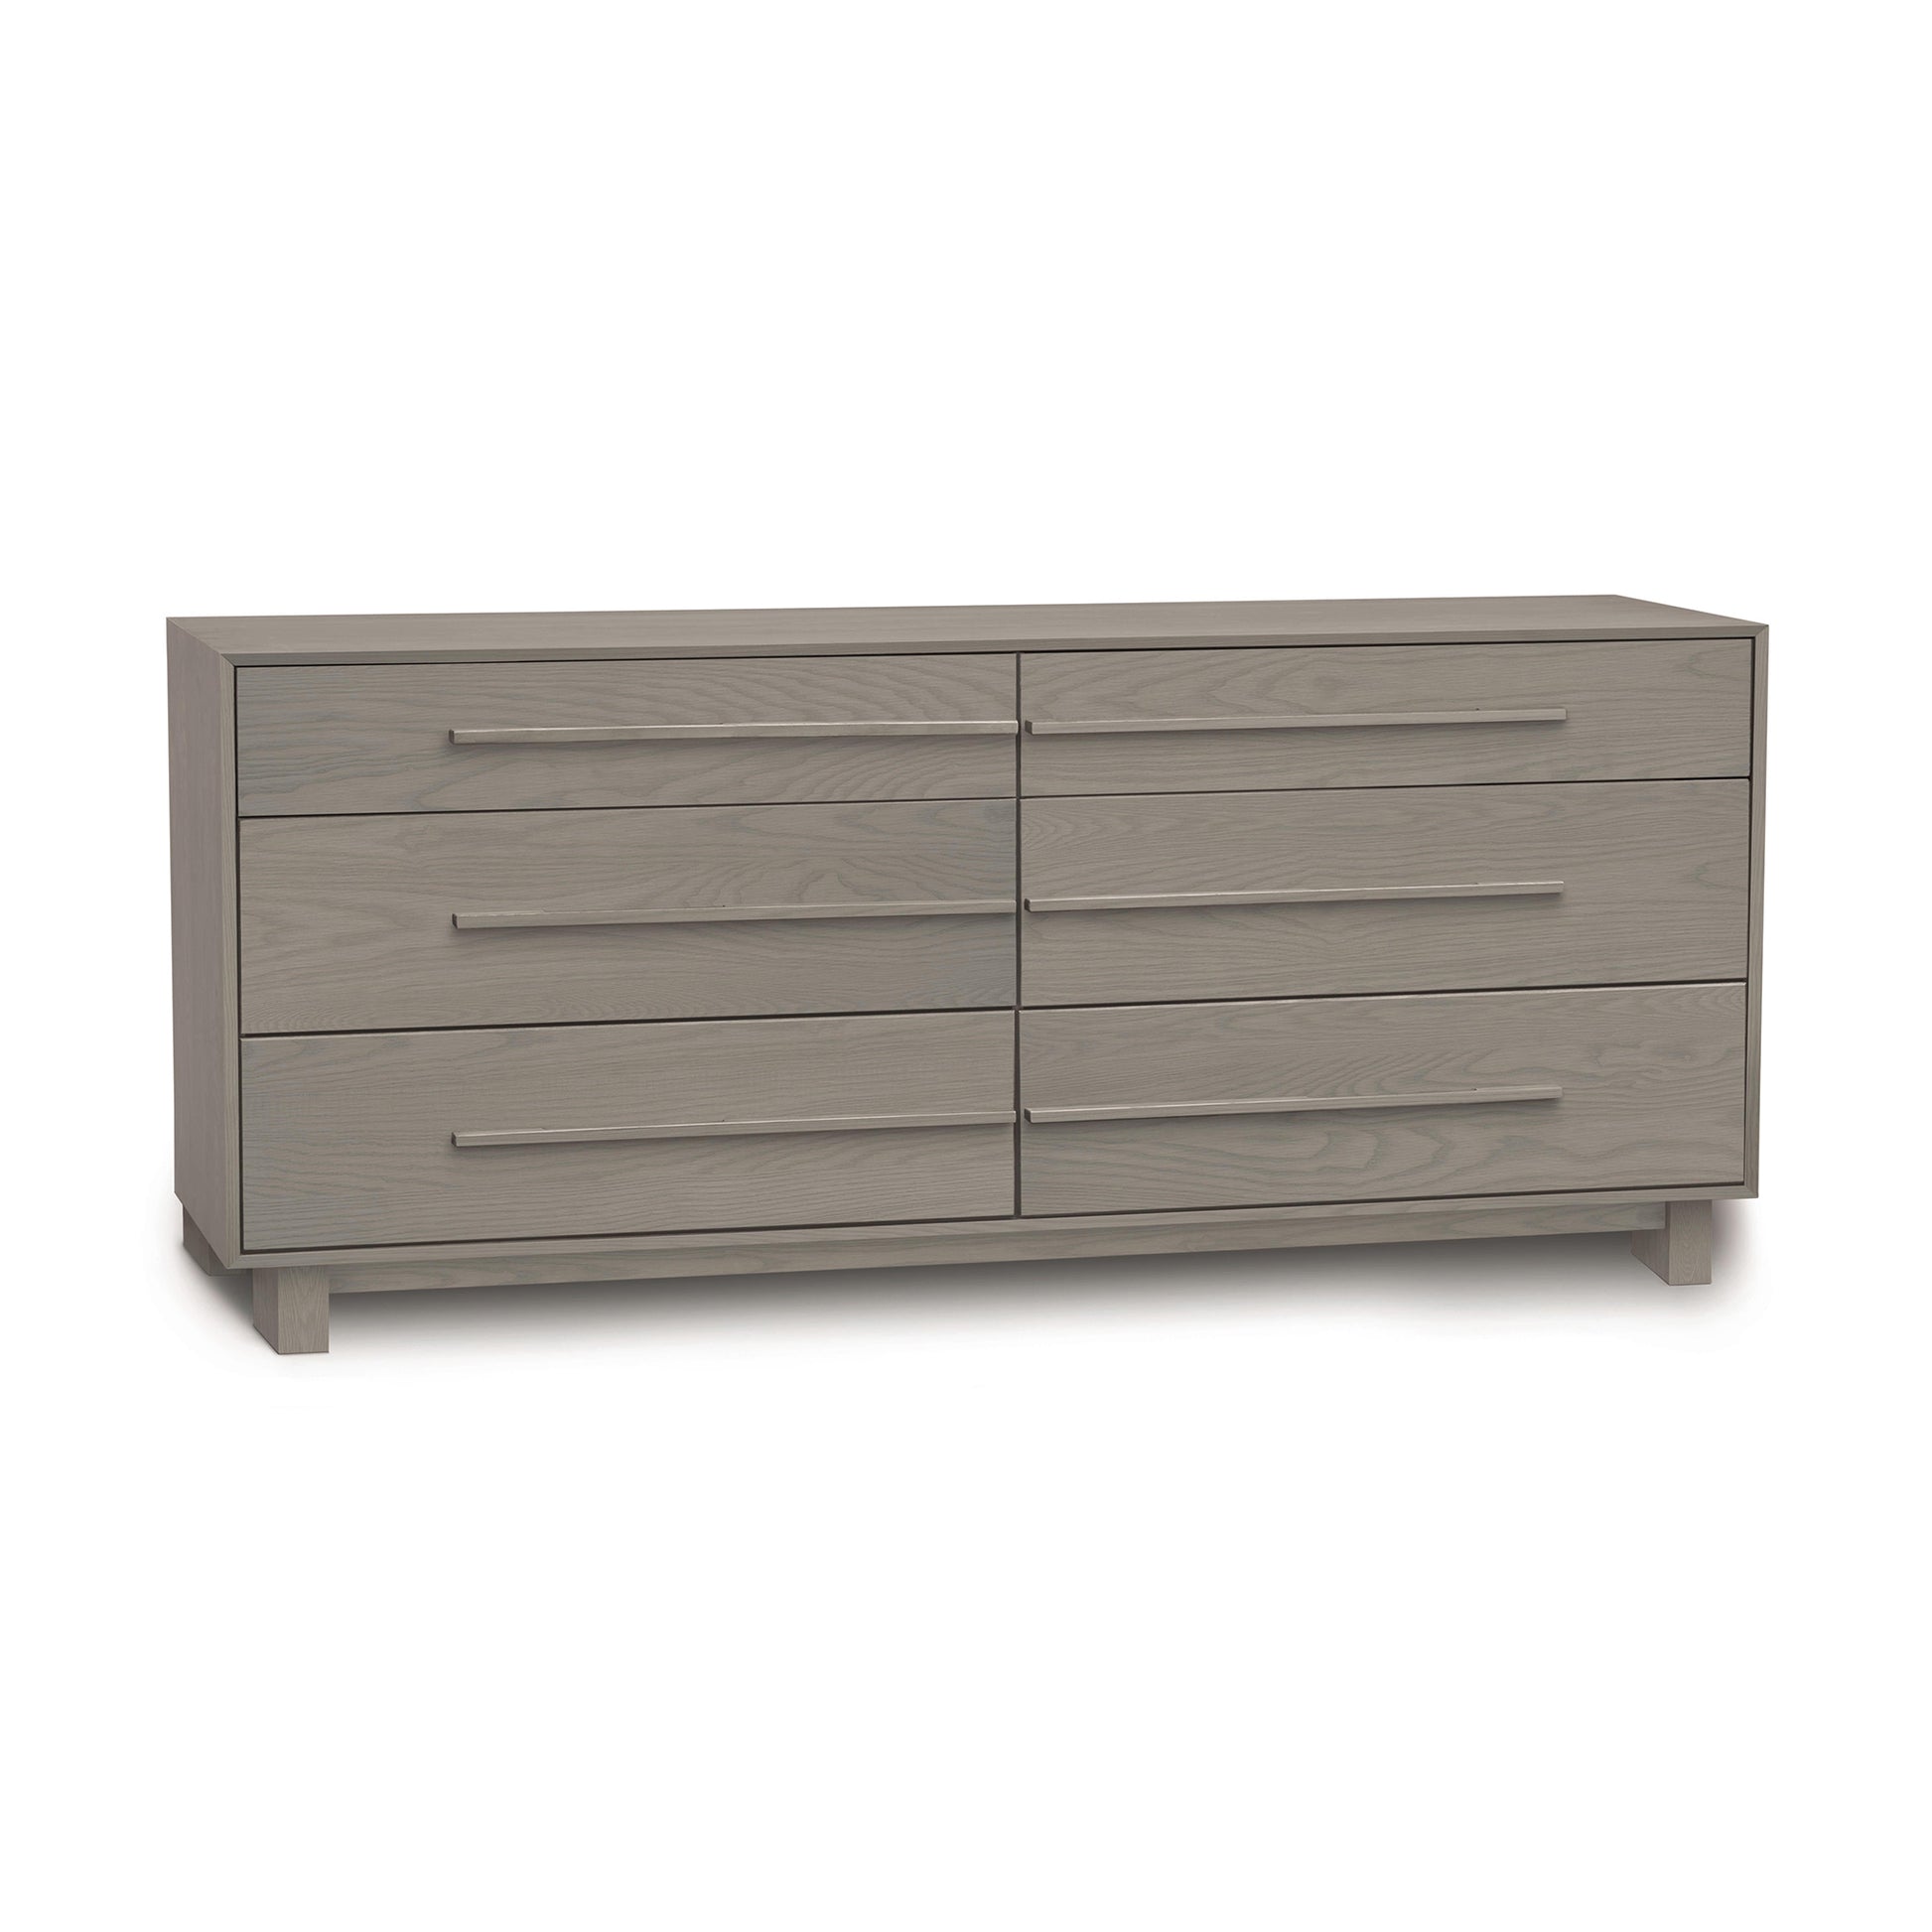 The Sloane 6-Drawer Dresser by Copeland Furniture, a modern bedroom piece, stands elegantly against a white background.